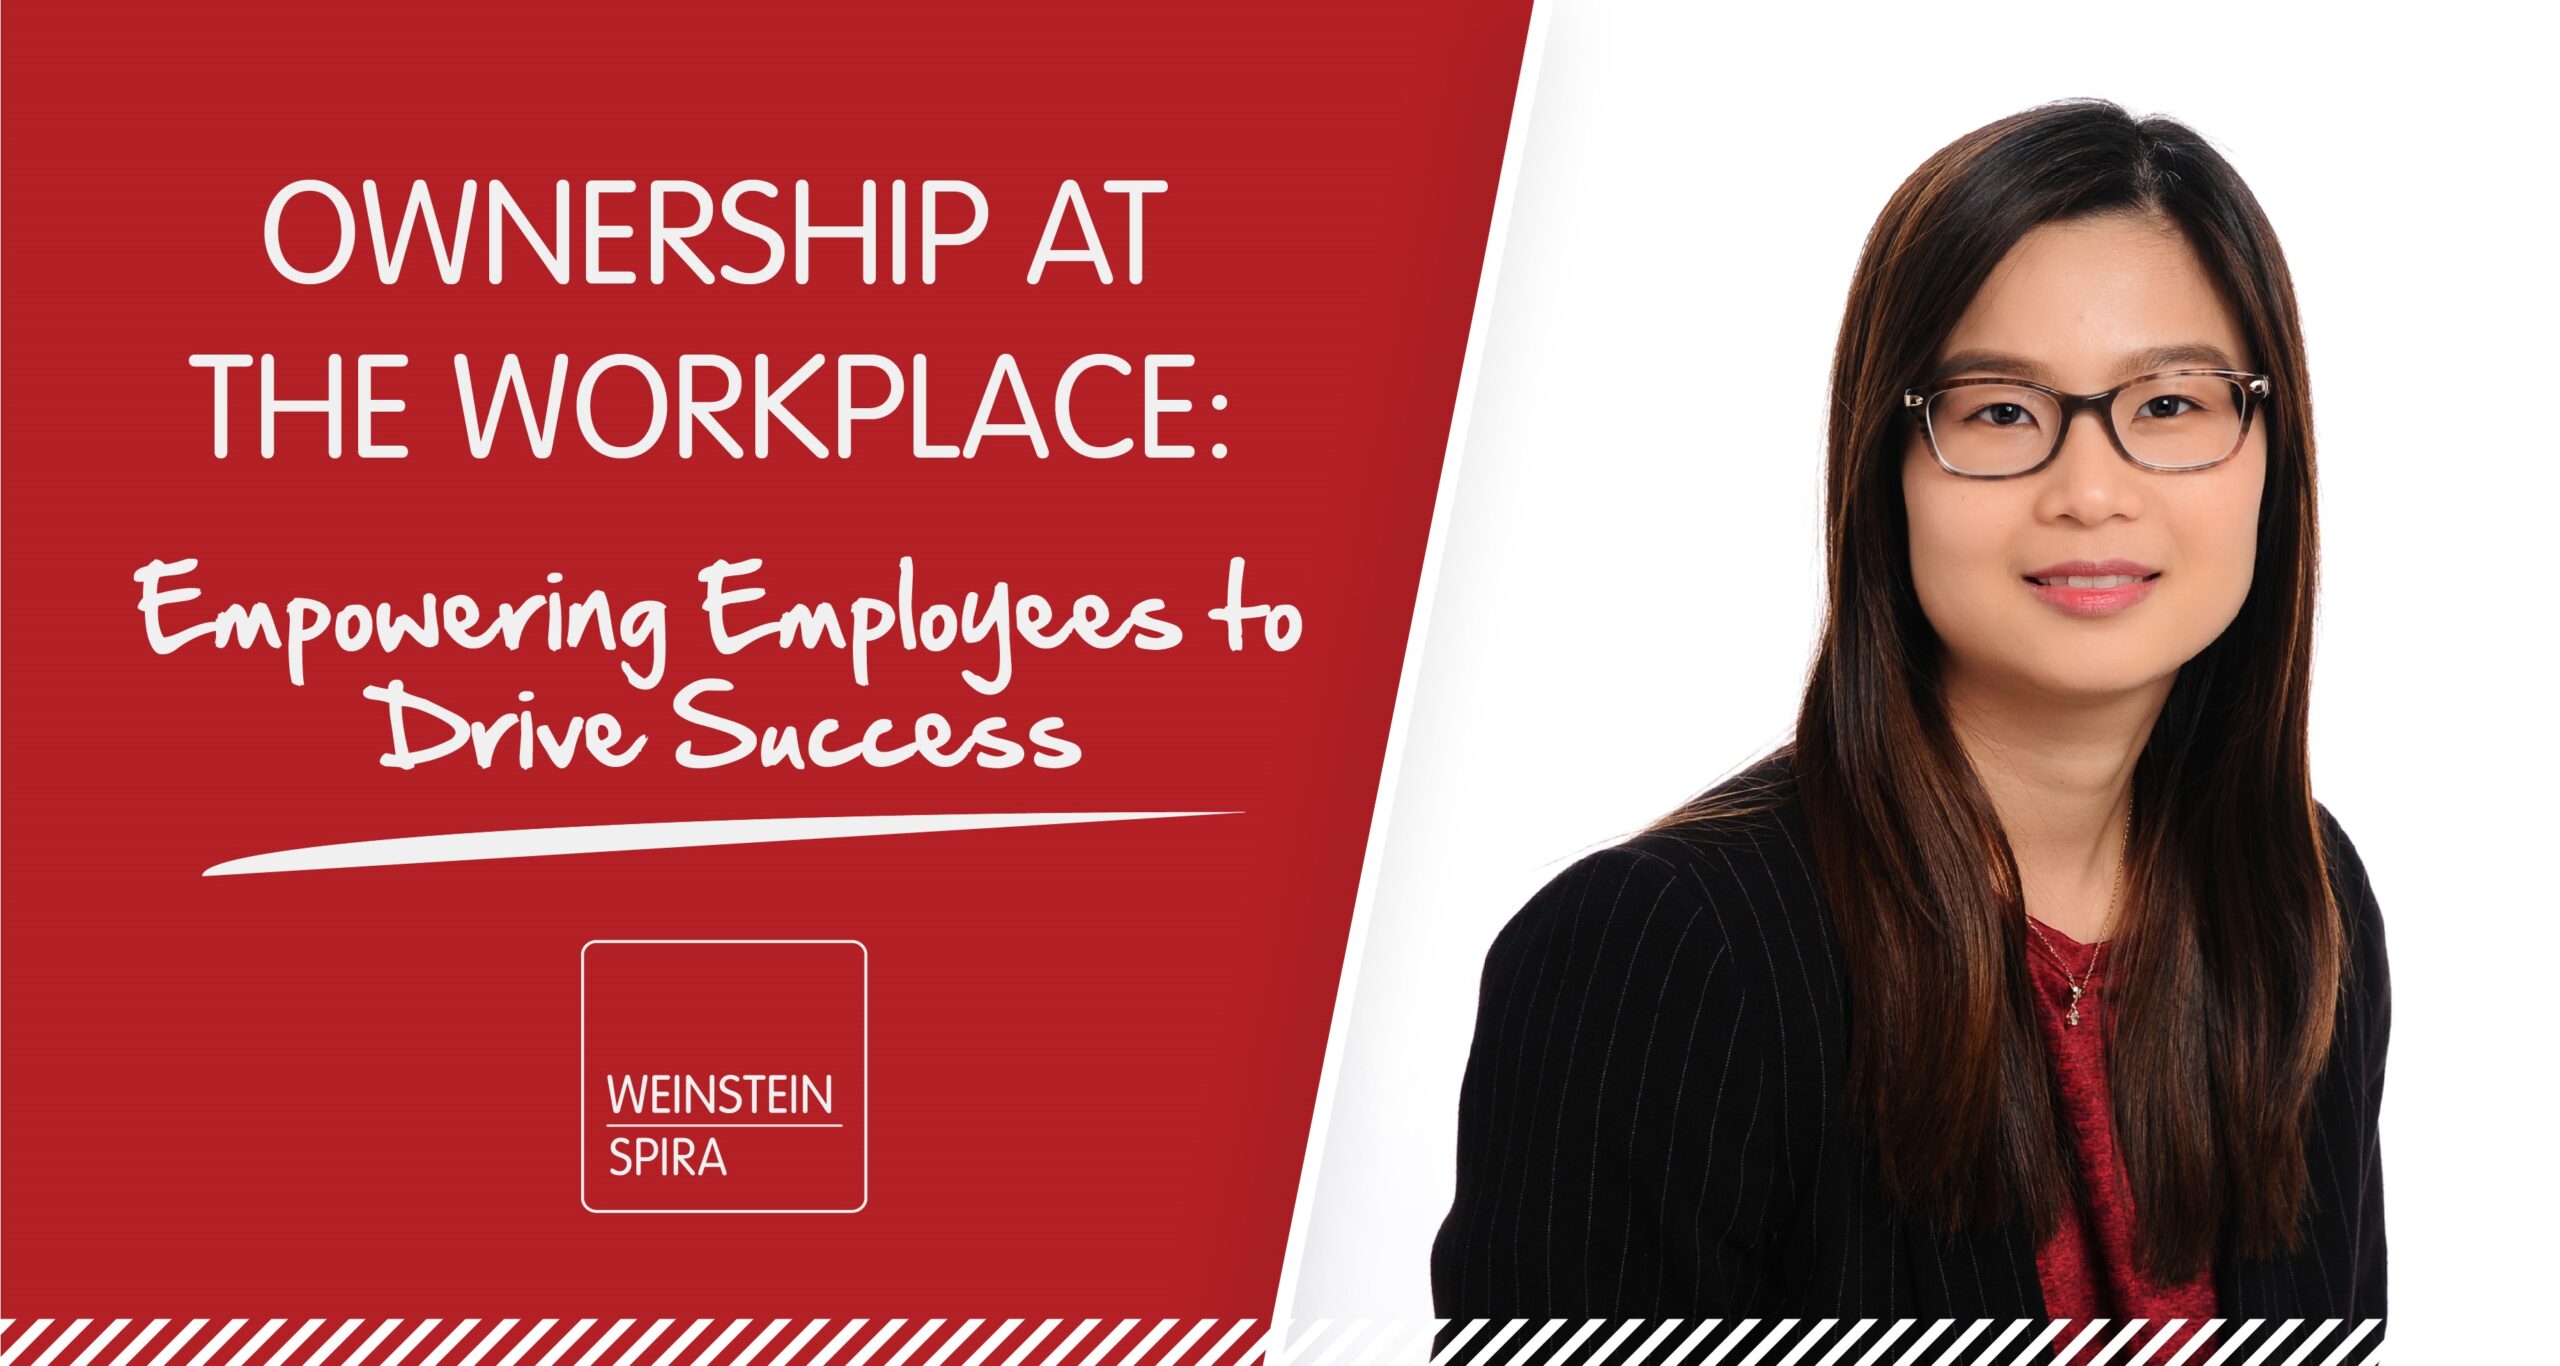 Ownership at the Workplace: Empowering Employees to Drive Success